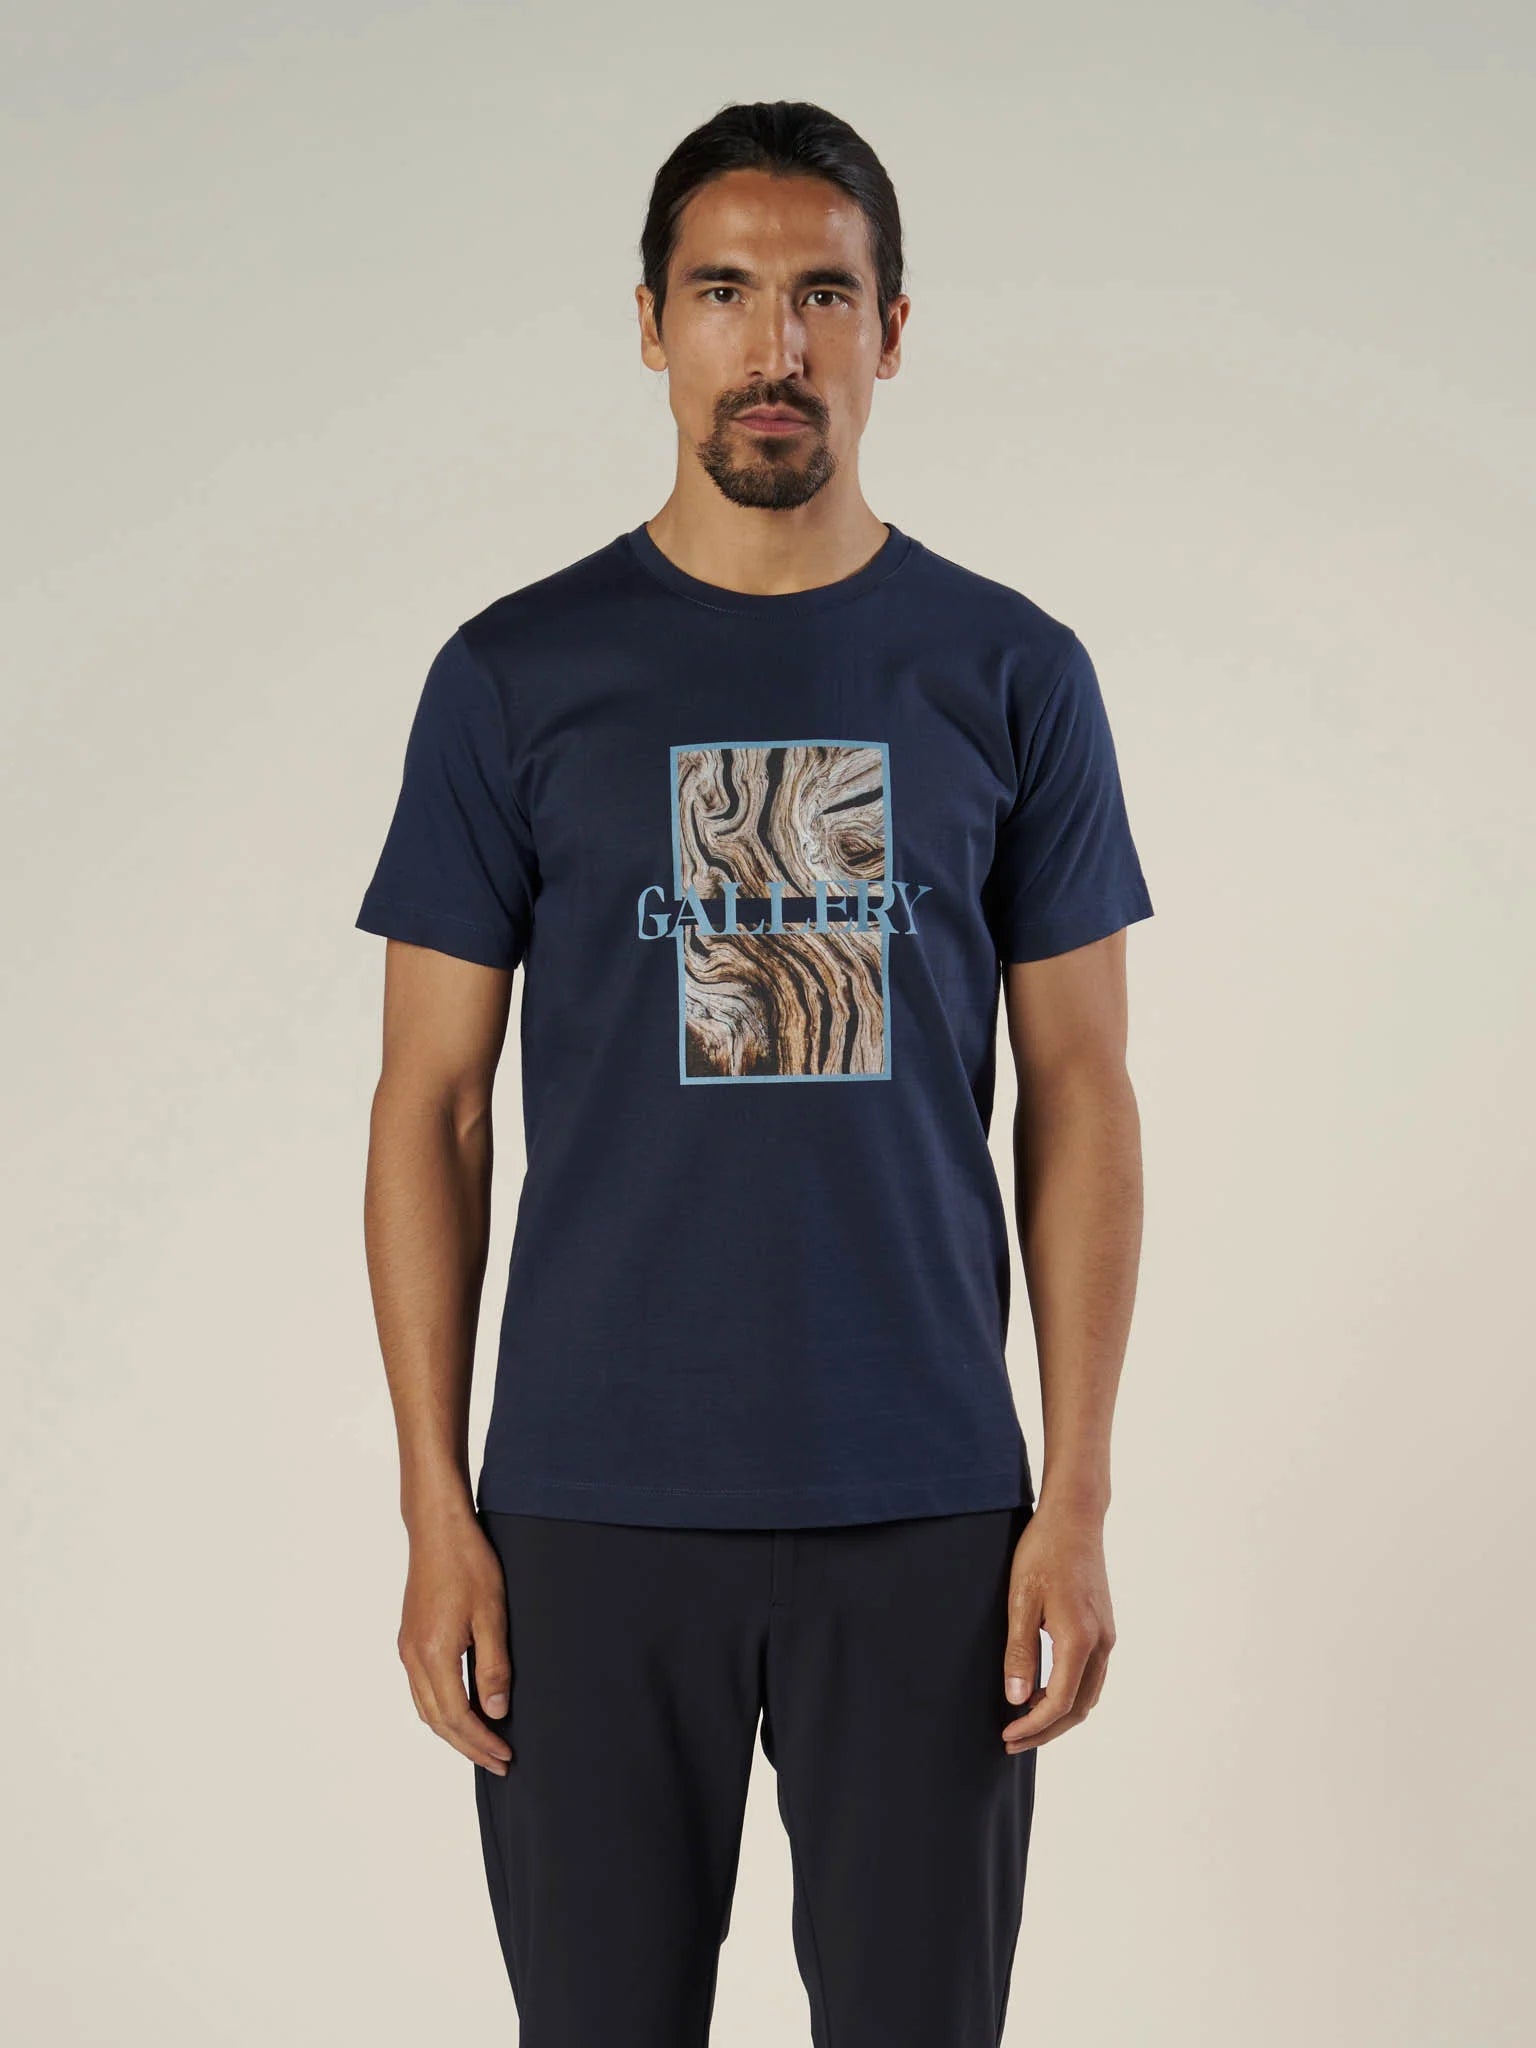 Vesly Ss Tee - Indigo Blue - The Sons online